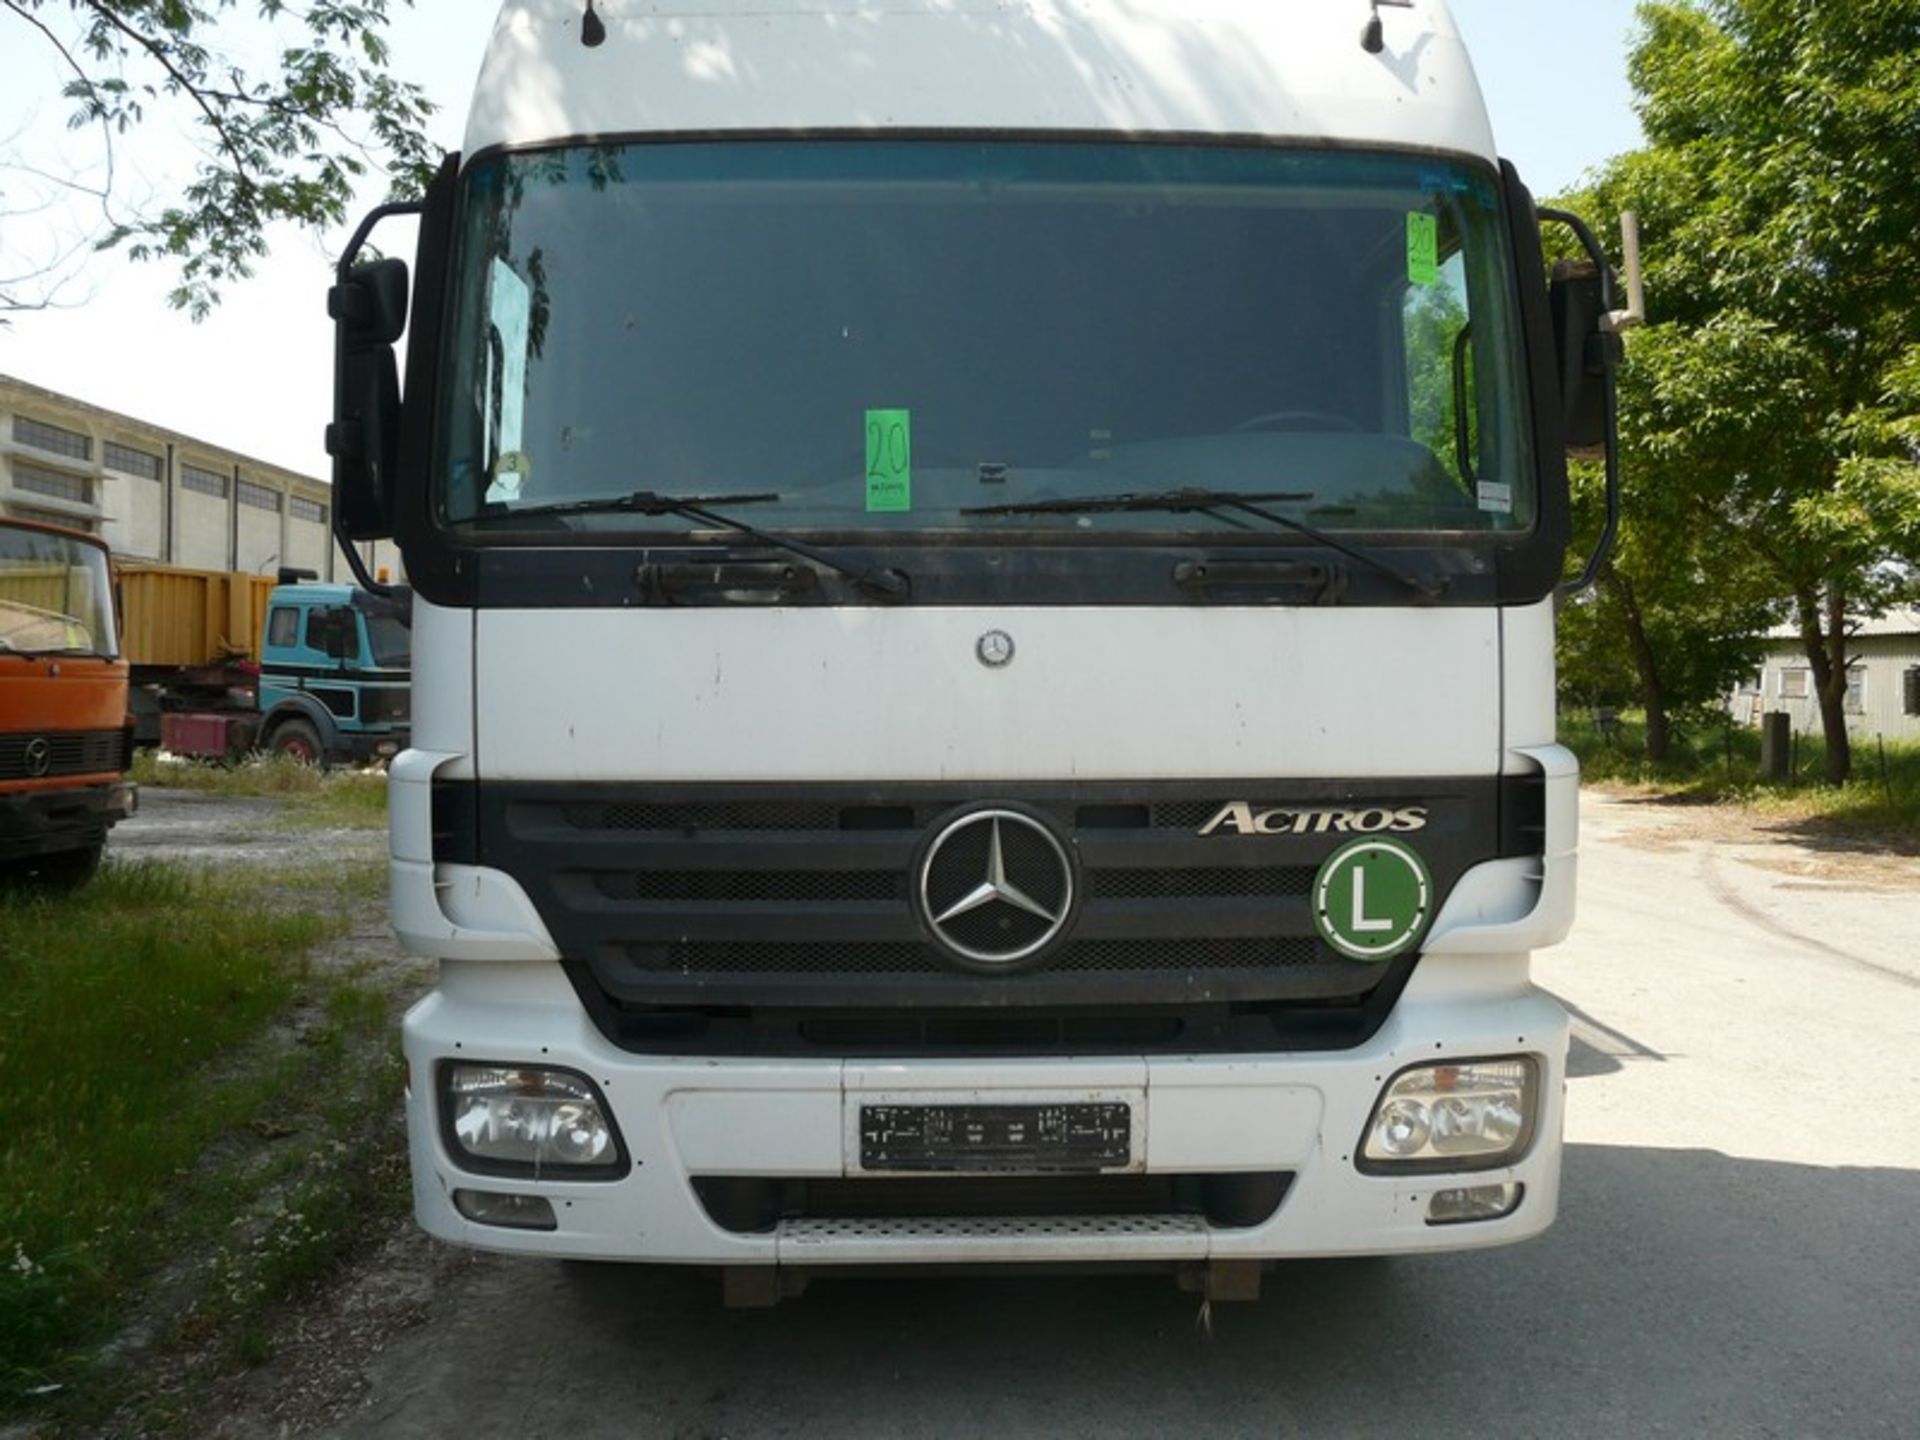 MERCEDES ACTROS Curtain side , REG NIK 4634,DIESEL , KM : 644682,Service Book available , Y.O.M 2004